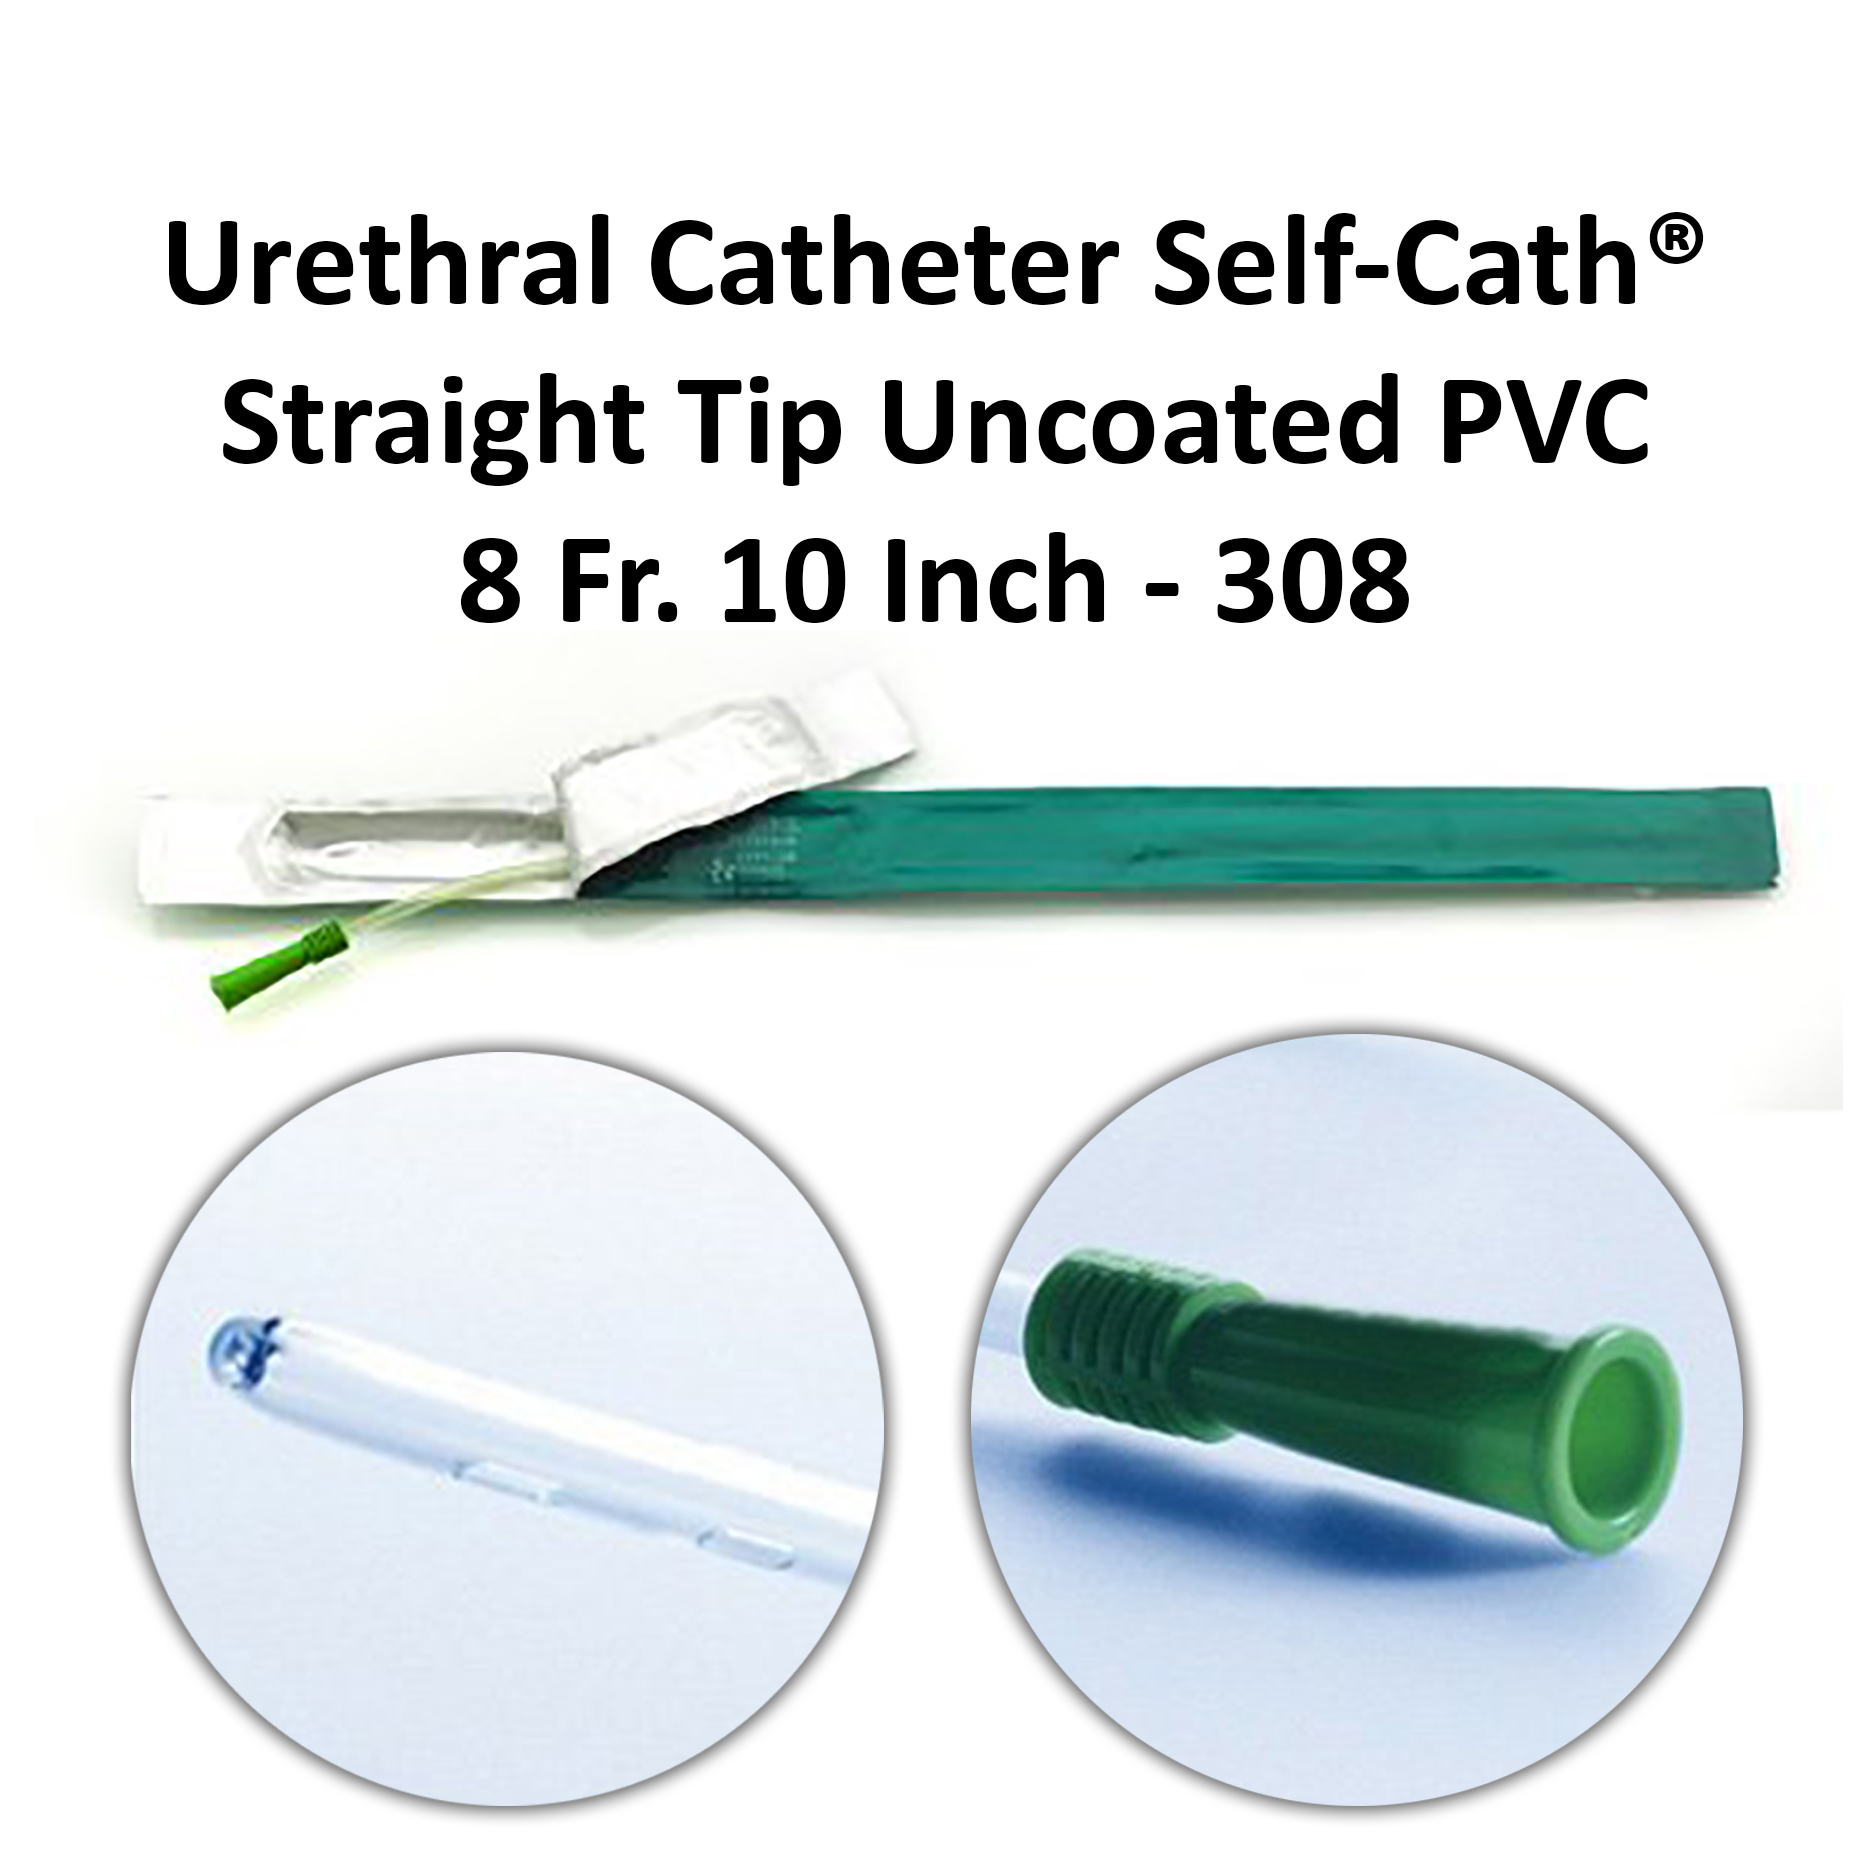 Urethral Catheter Self-Cath® Straight Tip Uncoated PVC 8 Fr. 10 Inch - 308